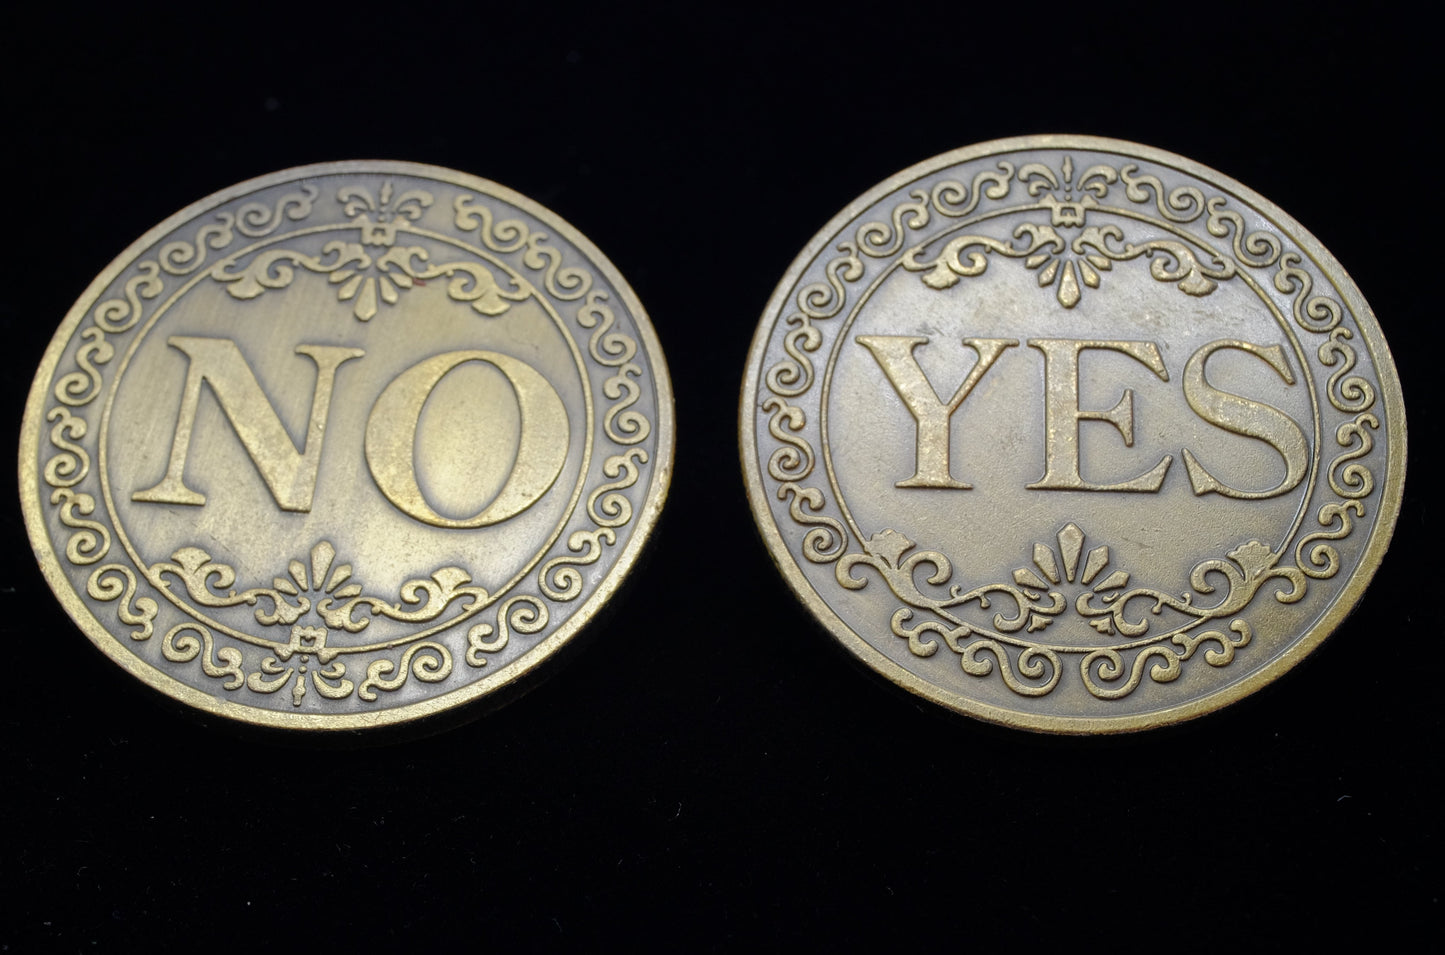 Fancy Yes and No Flip Coin